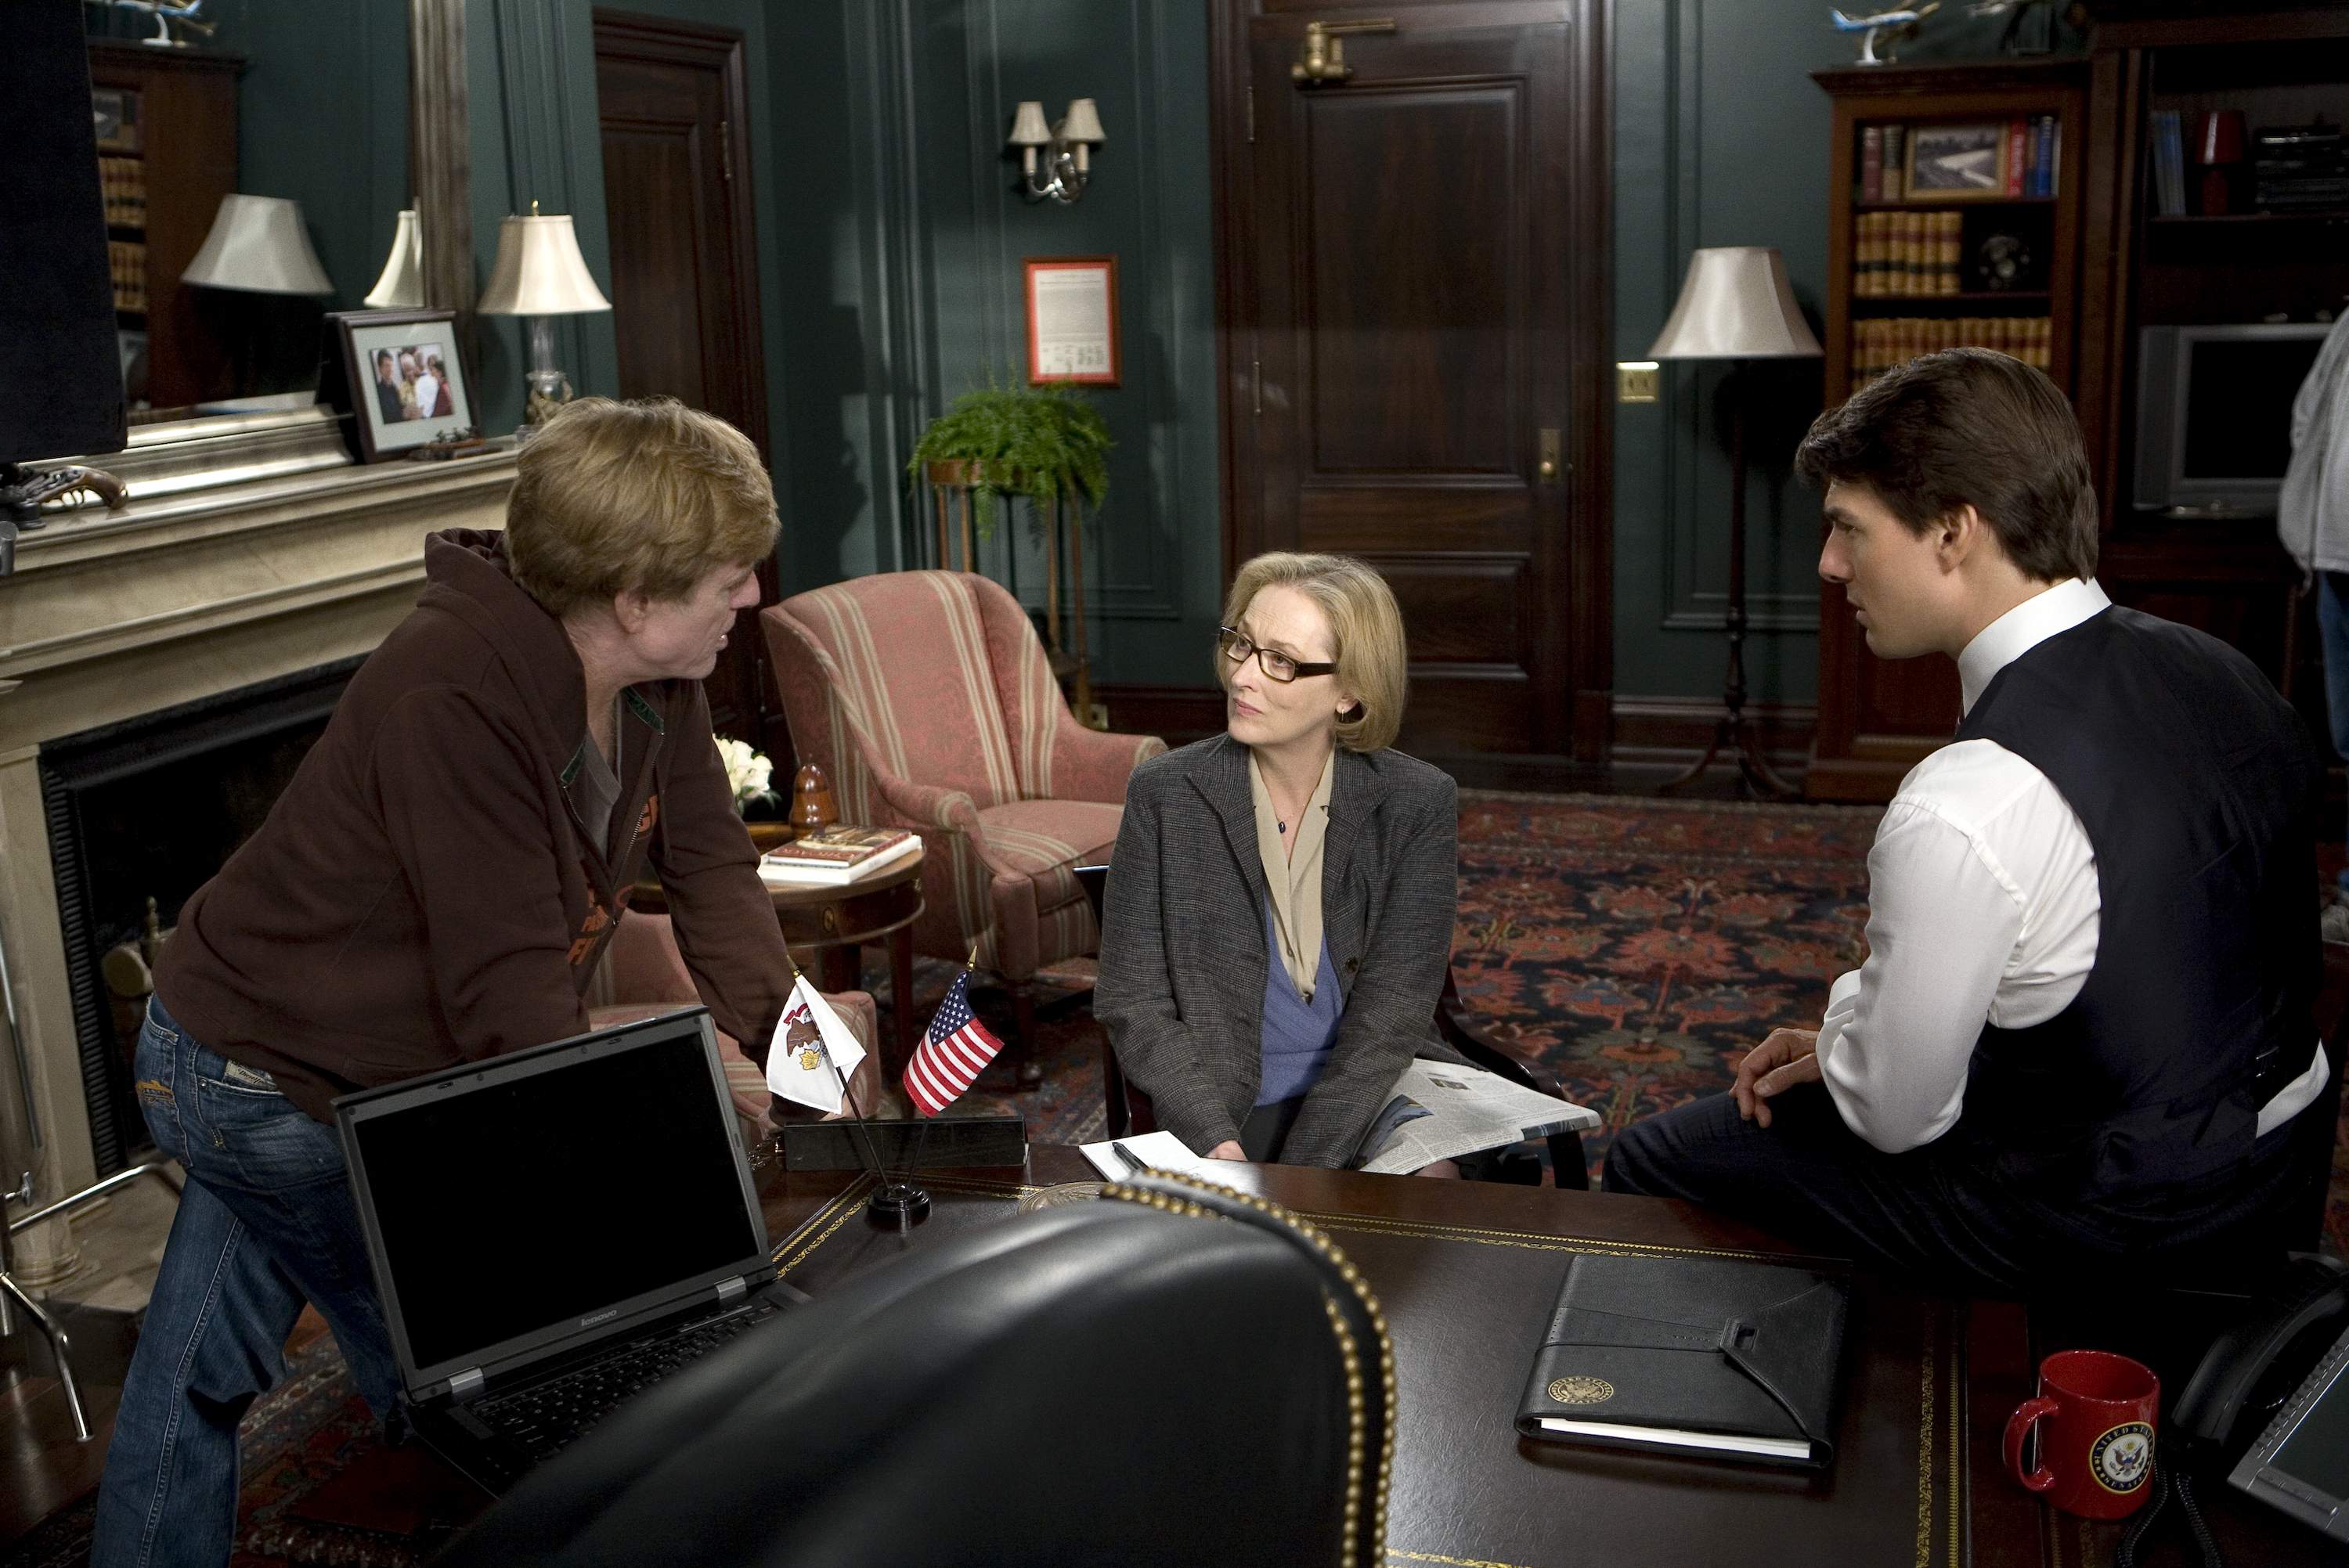 Director & star ROBERT REDFORD, MERYL STREEP and TOM CRUISE on the set of United Artists/MGM Pictures' LIONS FOR LAMBS (2007). Photo by: David James.